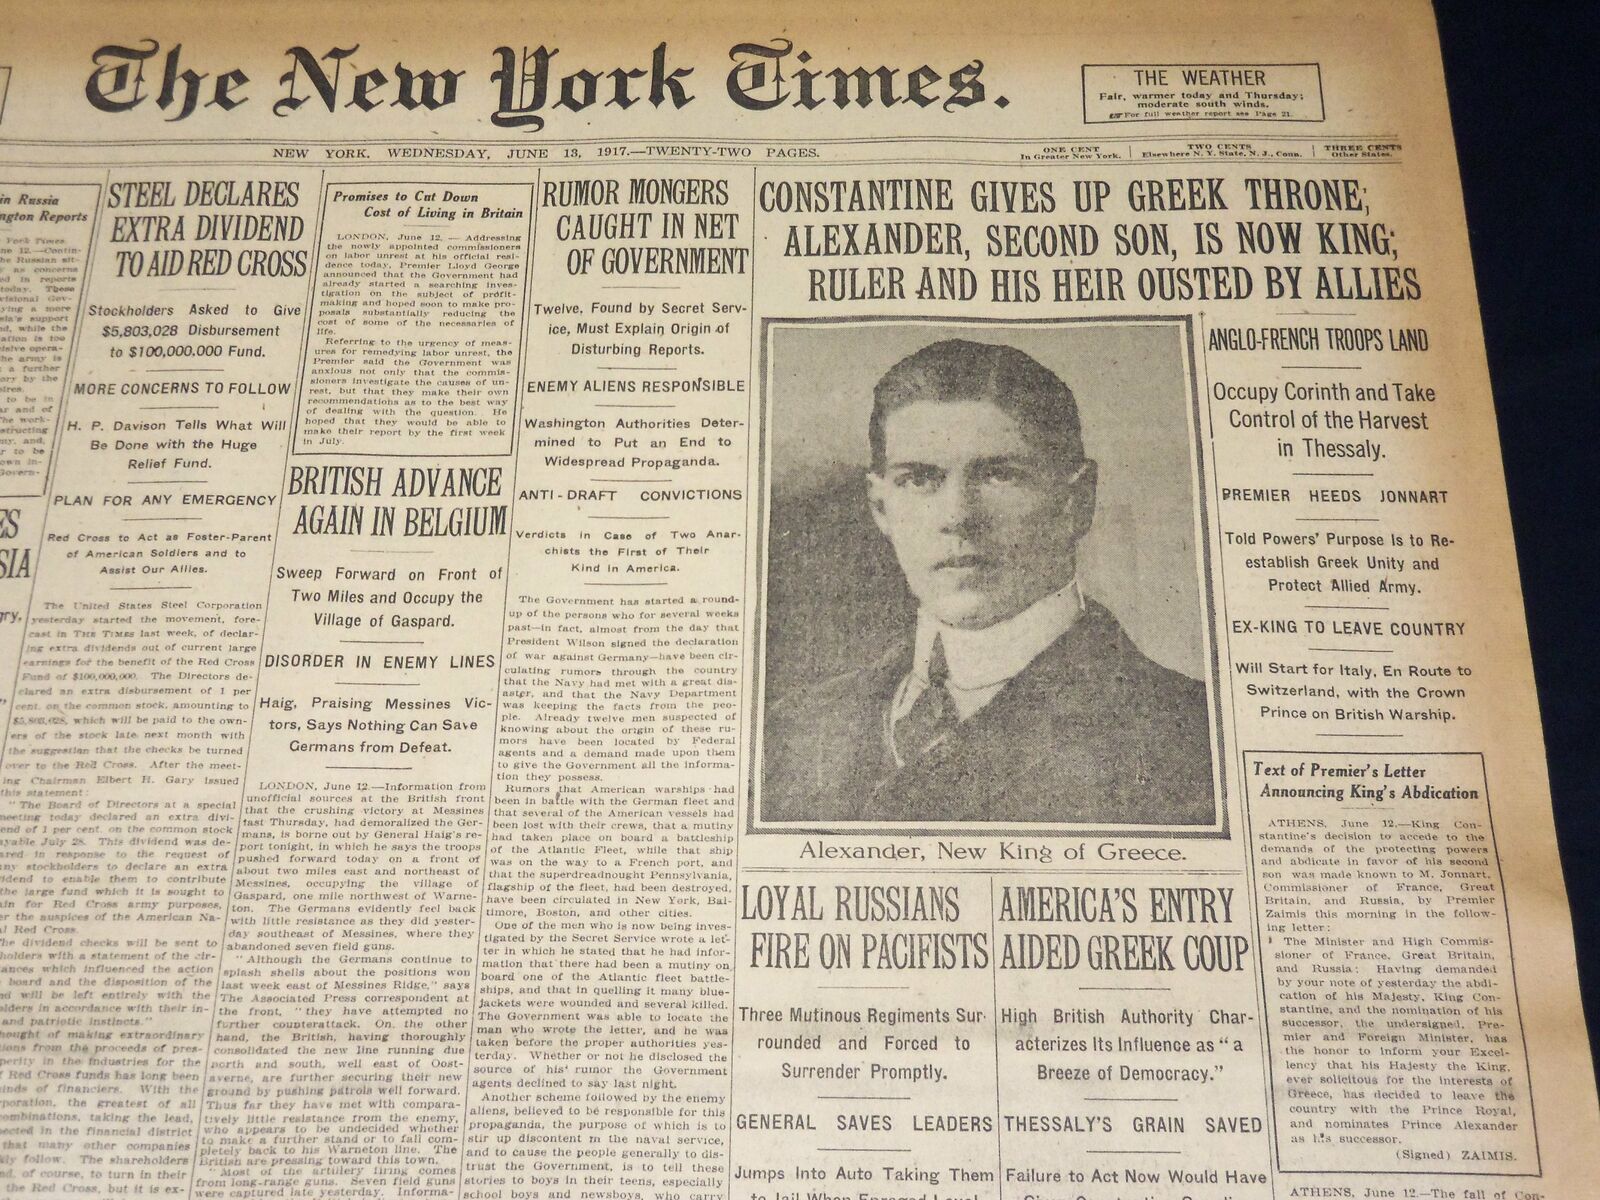 1917 JUNE 13 NEW YORK TIMES - CONSTANTINE GIVES UP GREEK THRONE - NT 7794